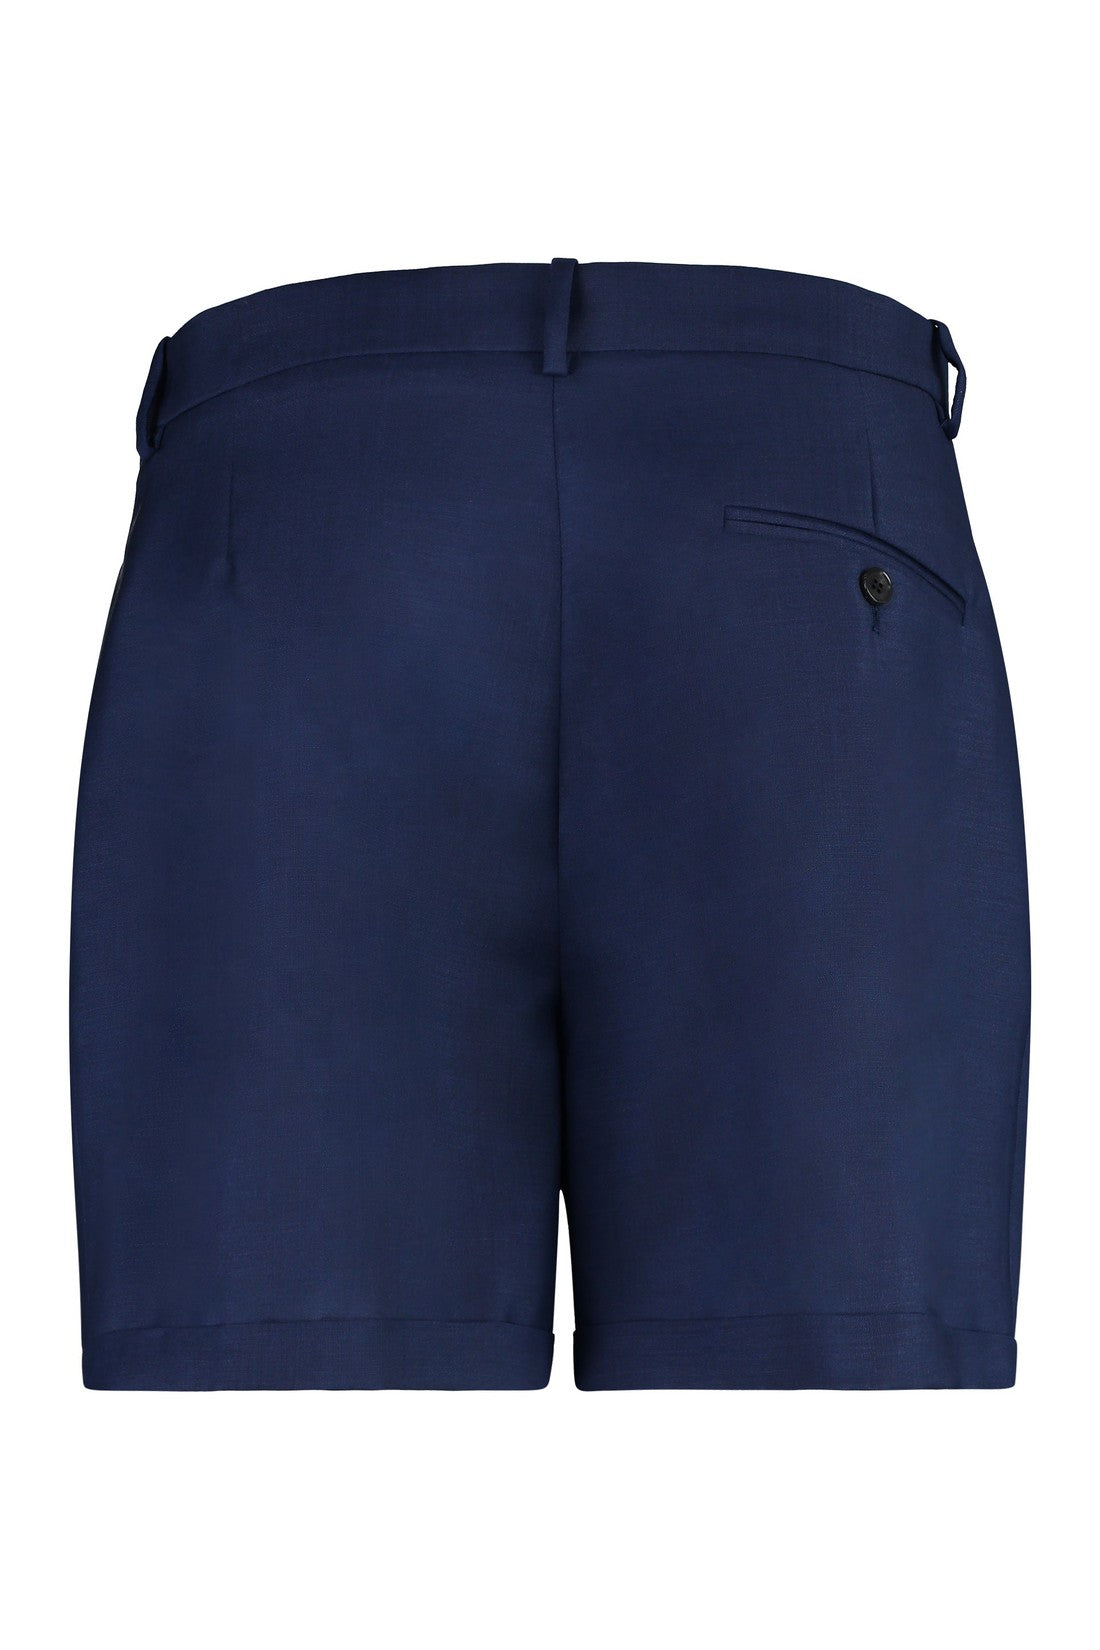 Bally-OUTLET-SALE-Virgin wool and mohair bermuda-shorts-ARCHIVIST